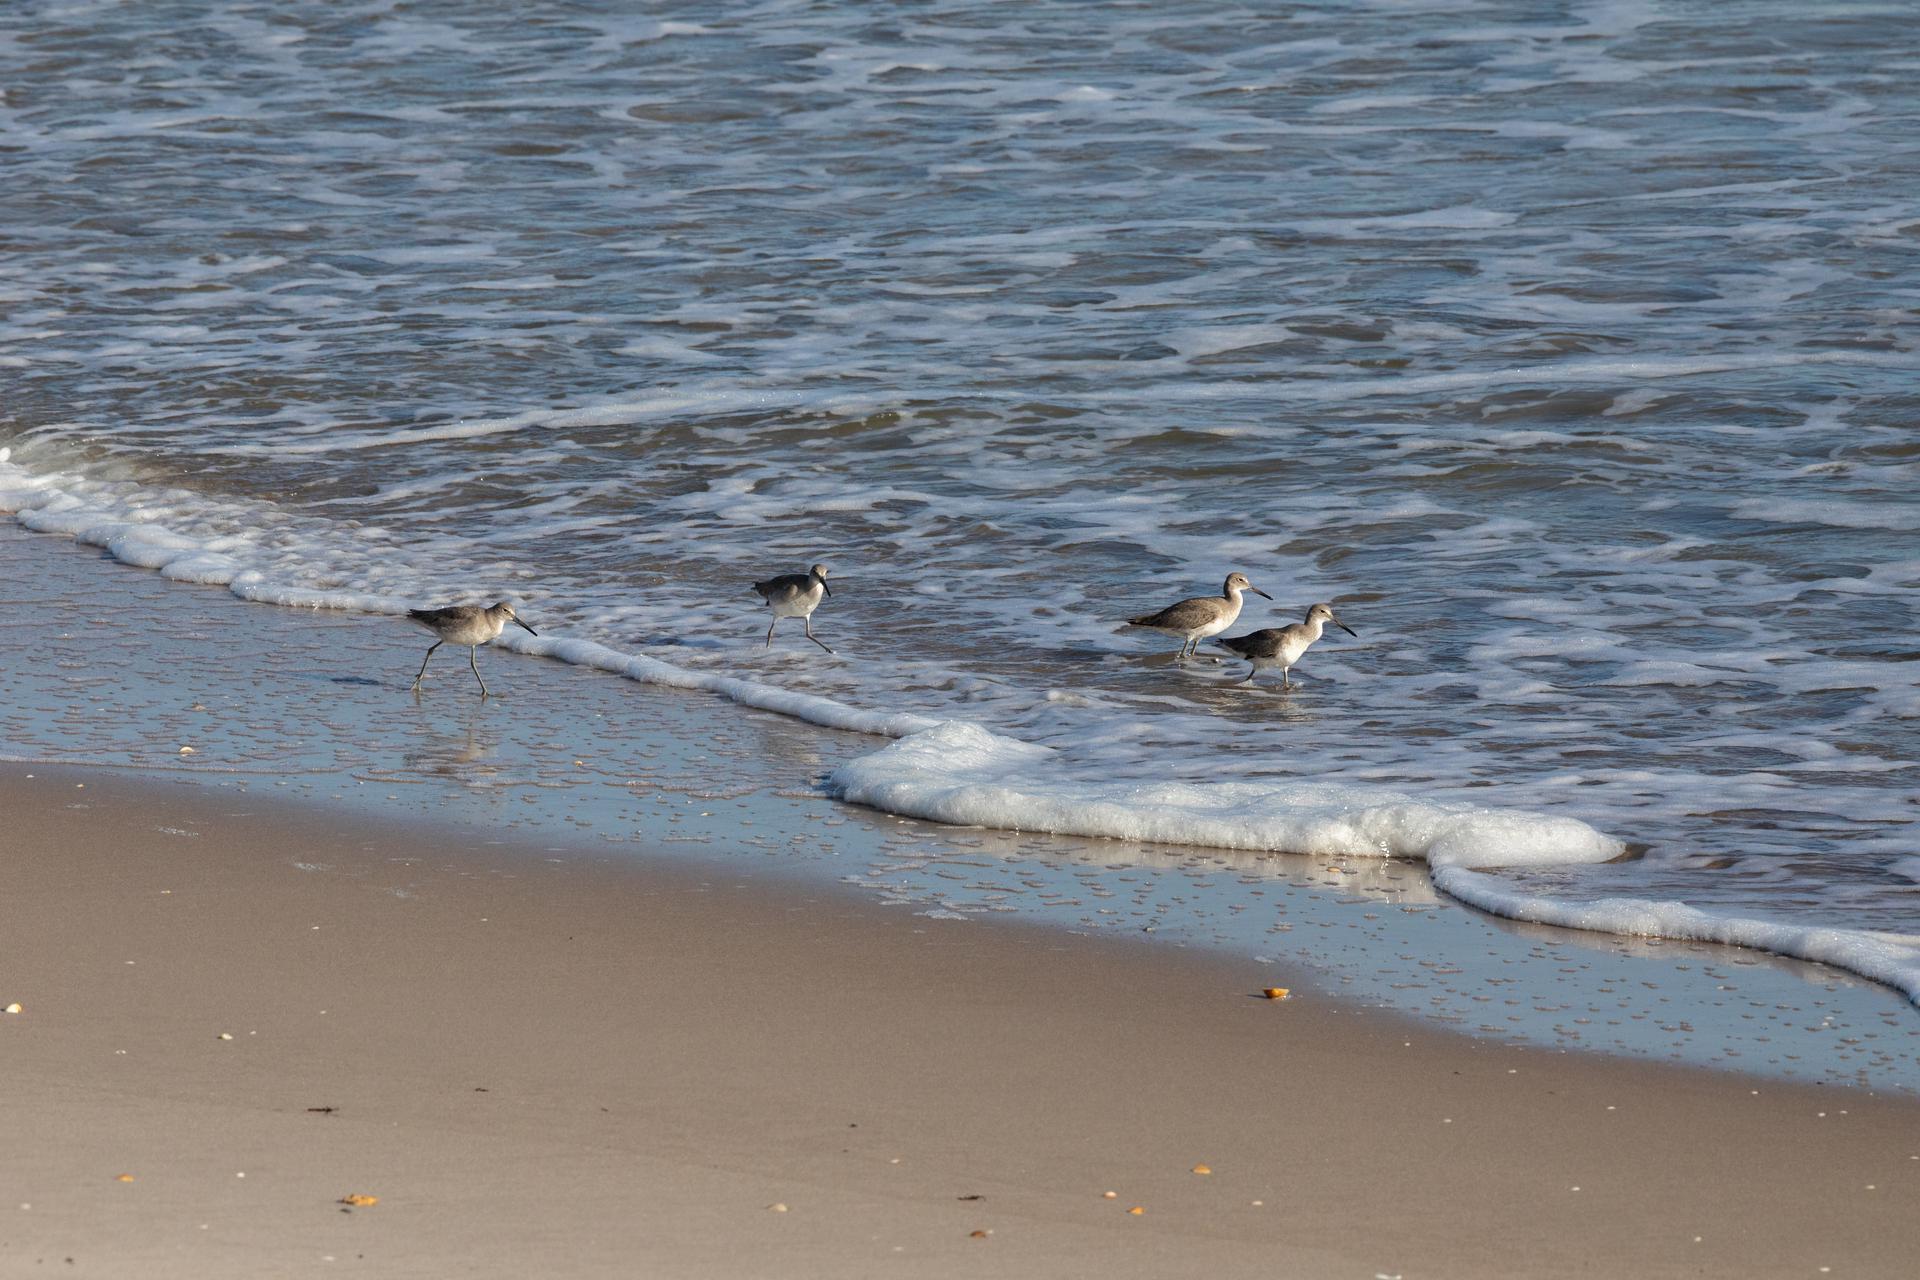 Sandpipers near Kennedy Space Center